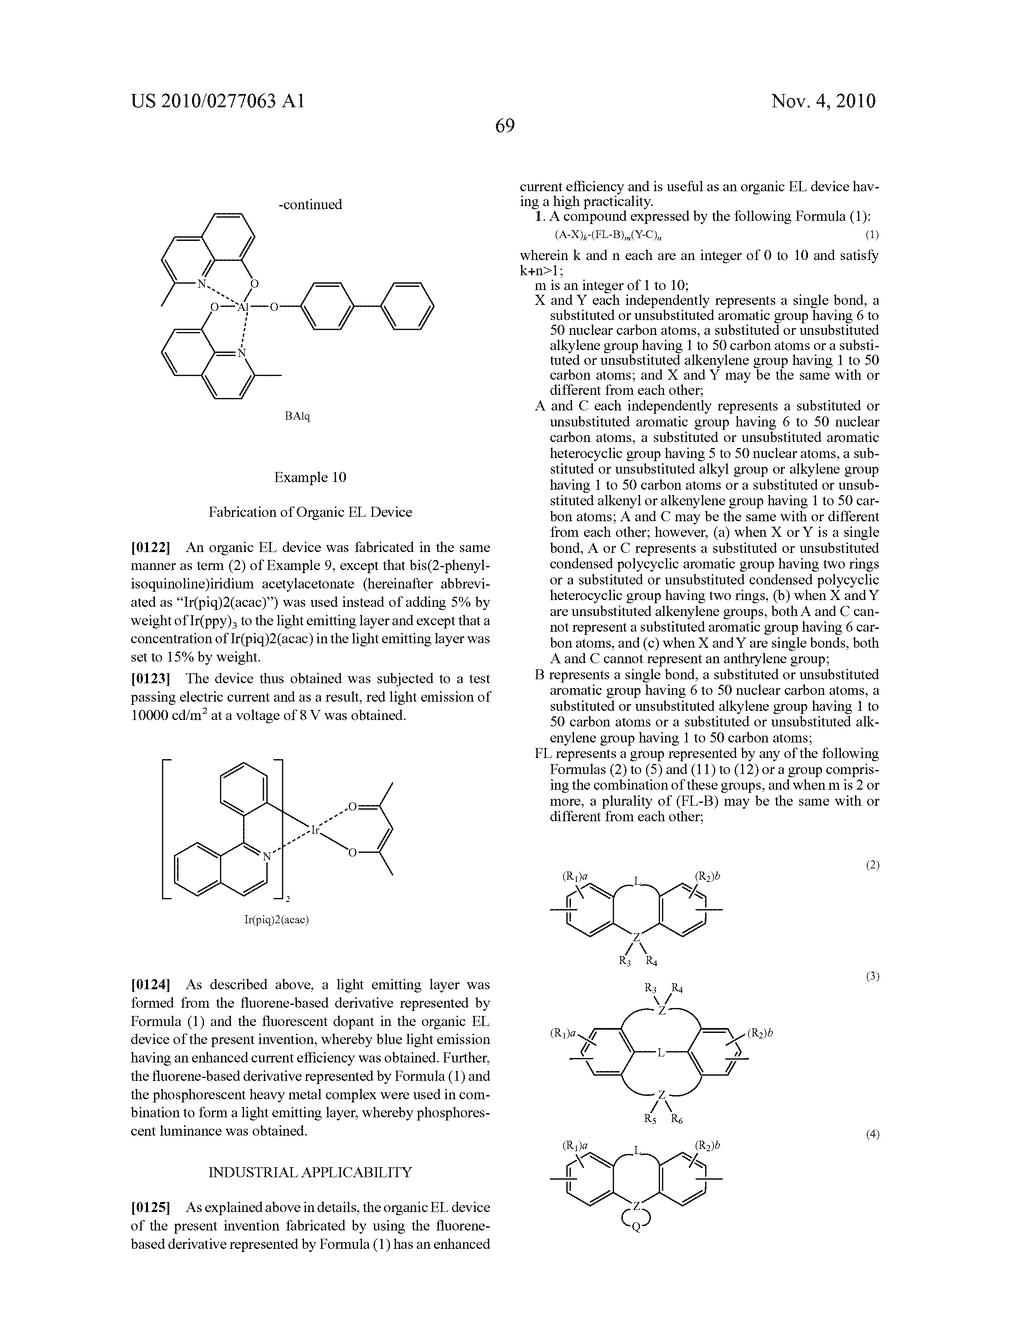 FLUORENE-BASED DERIVATIVE AND ORGANIC ELECTROLUMINESCENCE DEVICE EMPLOYING THE SAME - diagram, schematic, and image 70